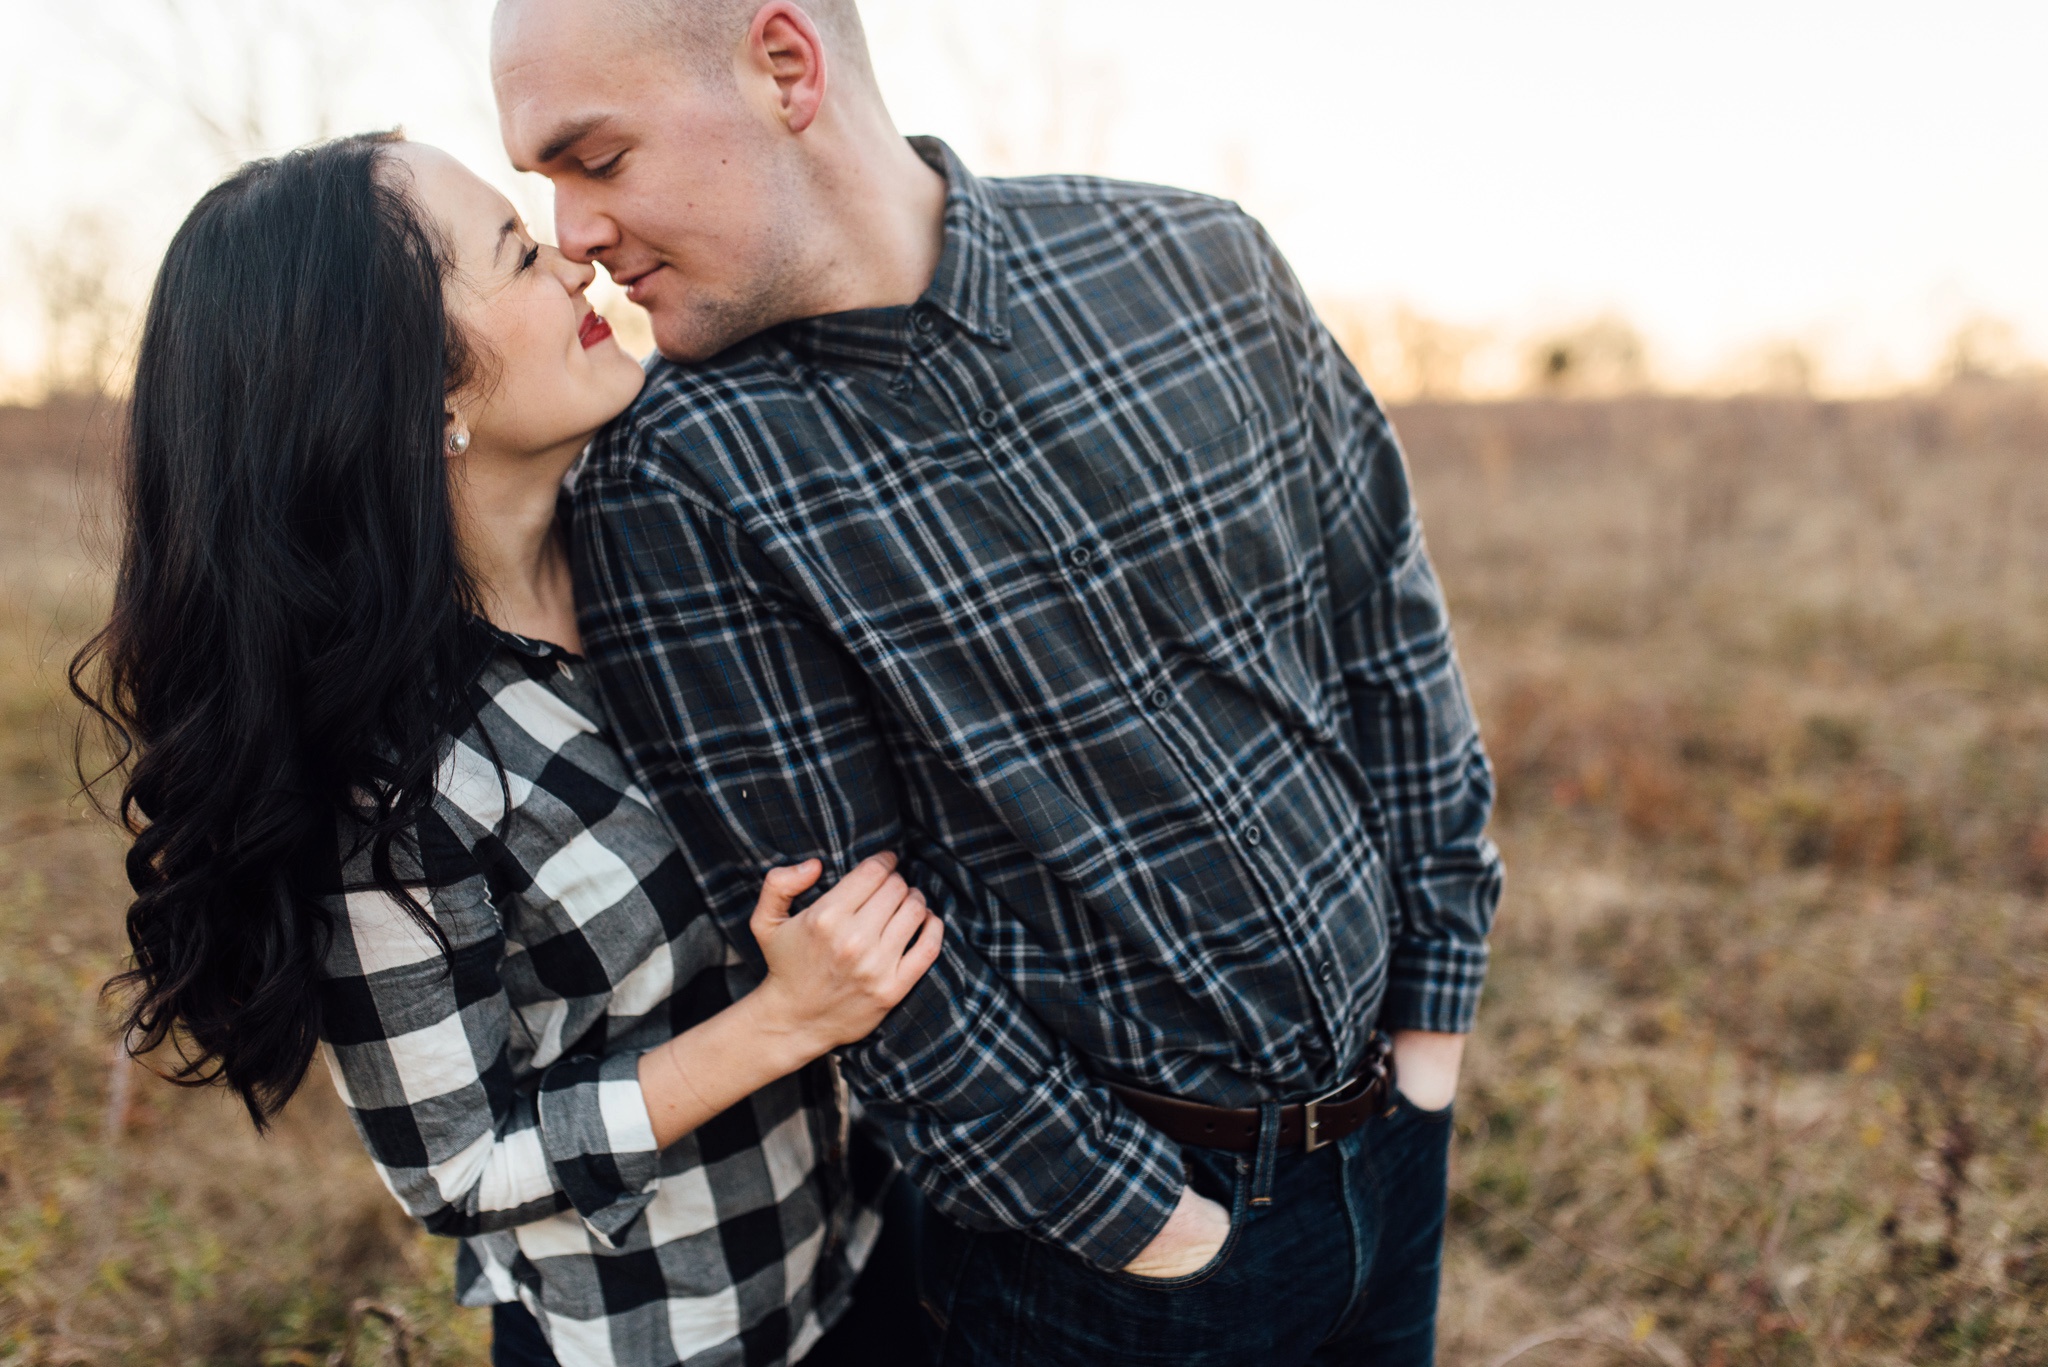 roni-graham-valley-forge-anniversary-session-alison-dunn-photography-photo-022